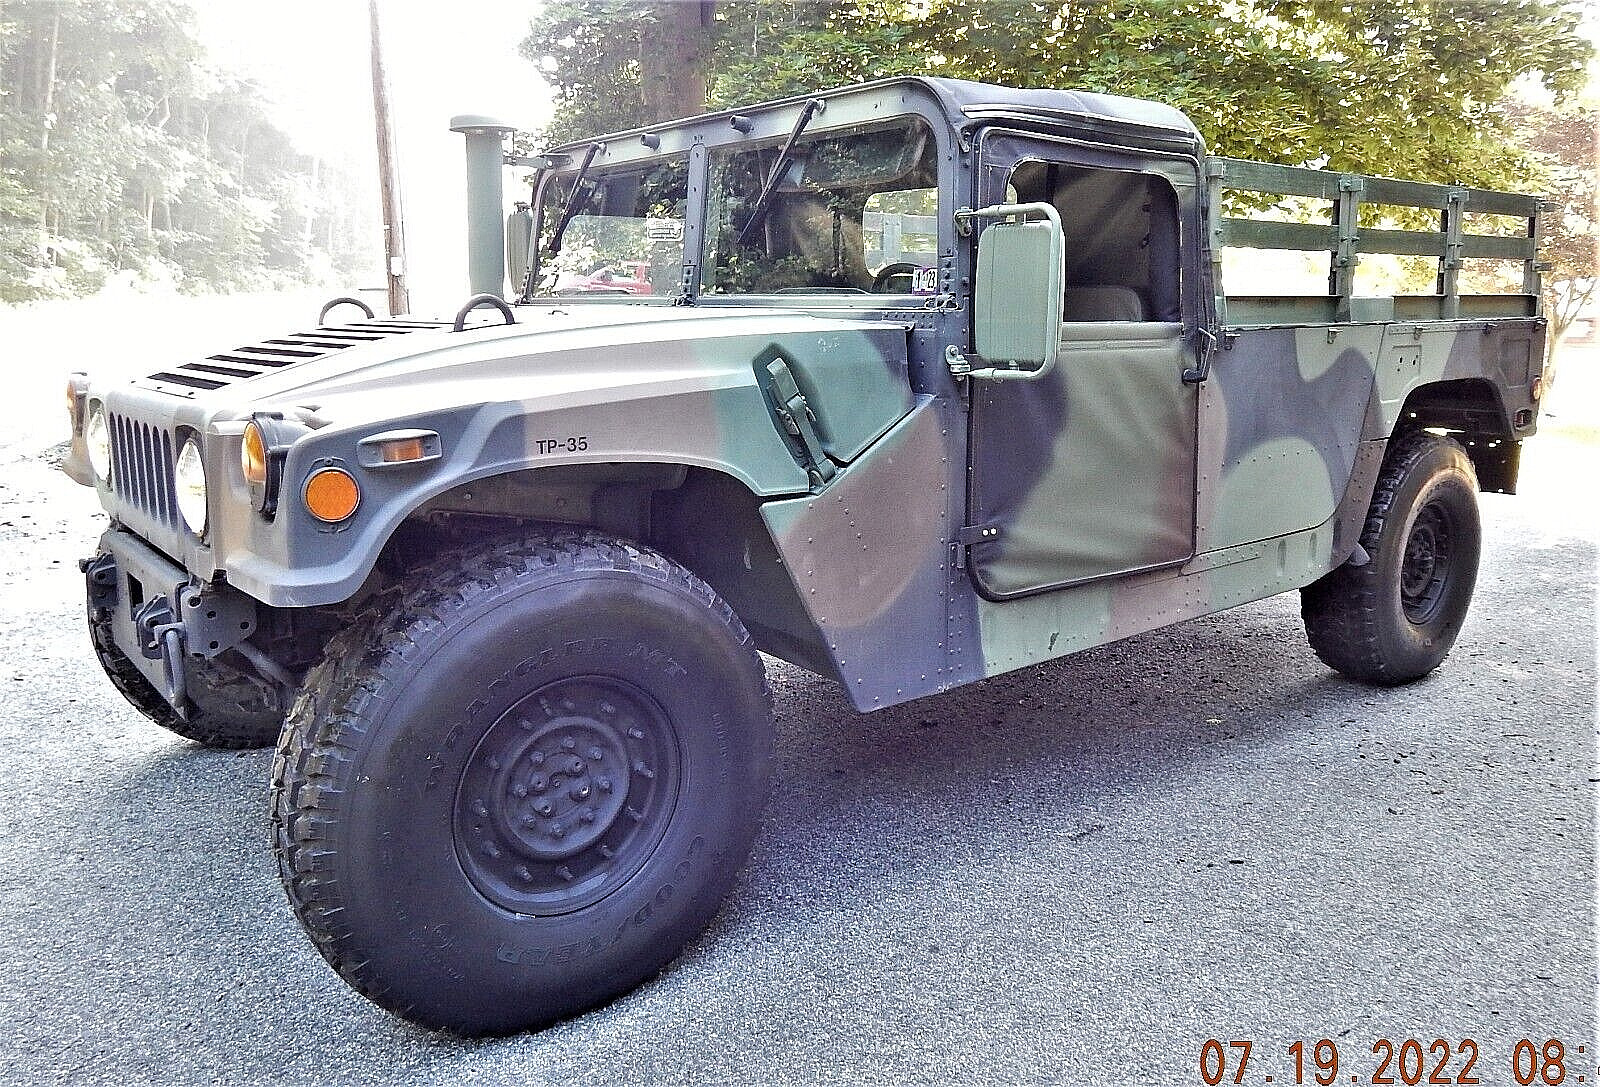 2003 Hummer H1 Original Military Issued